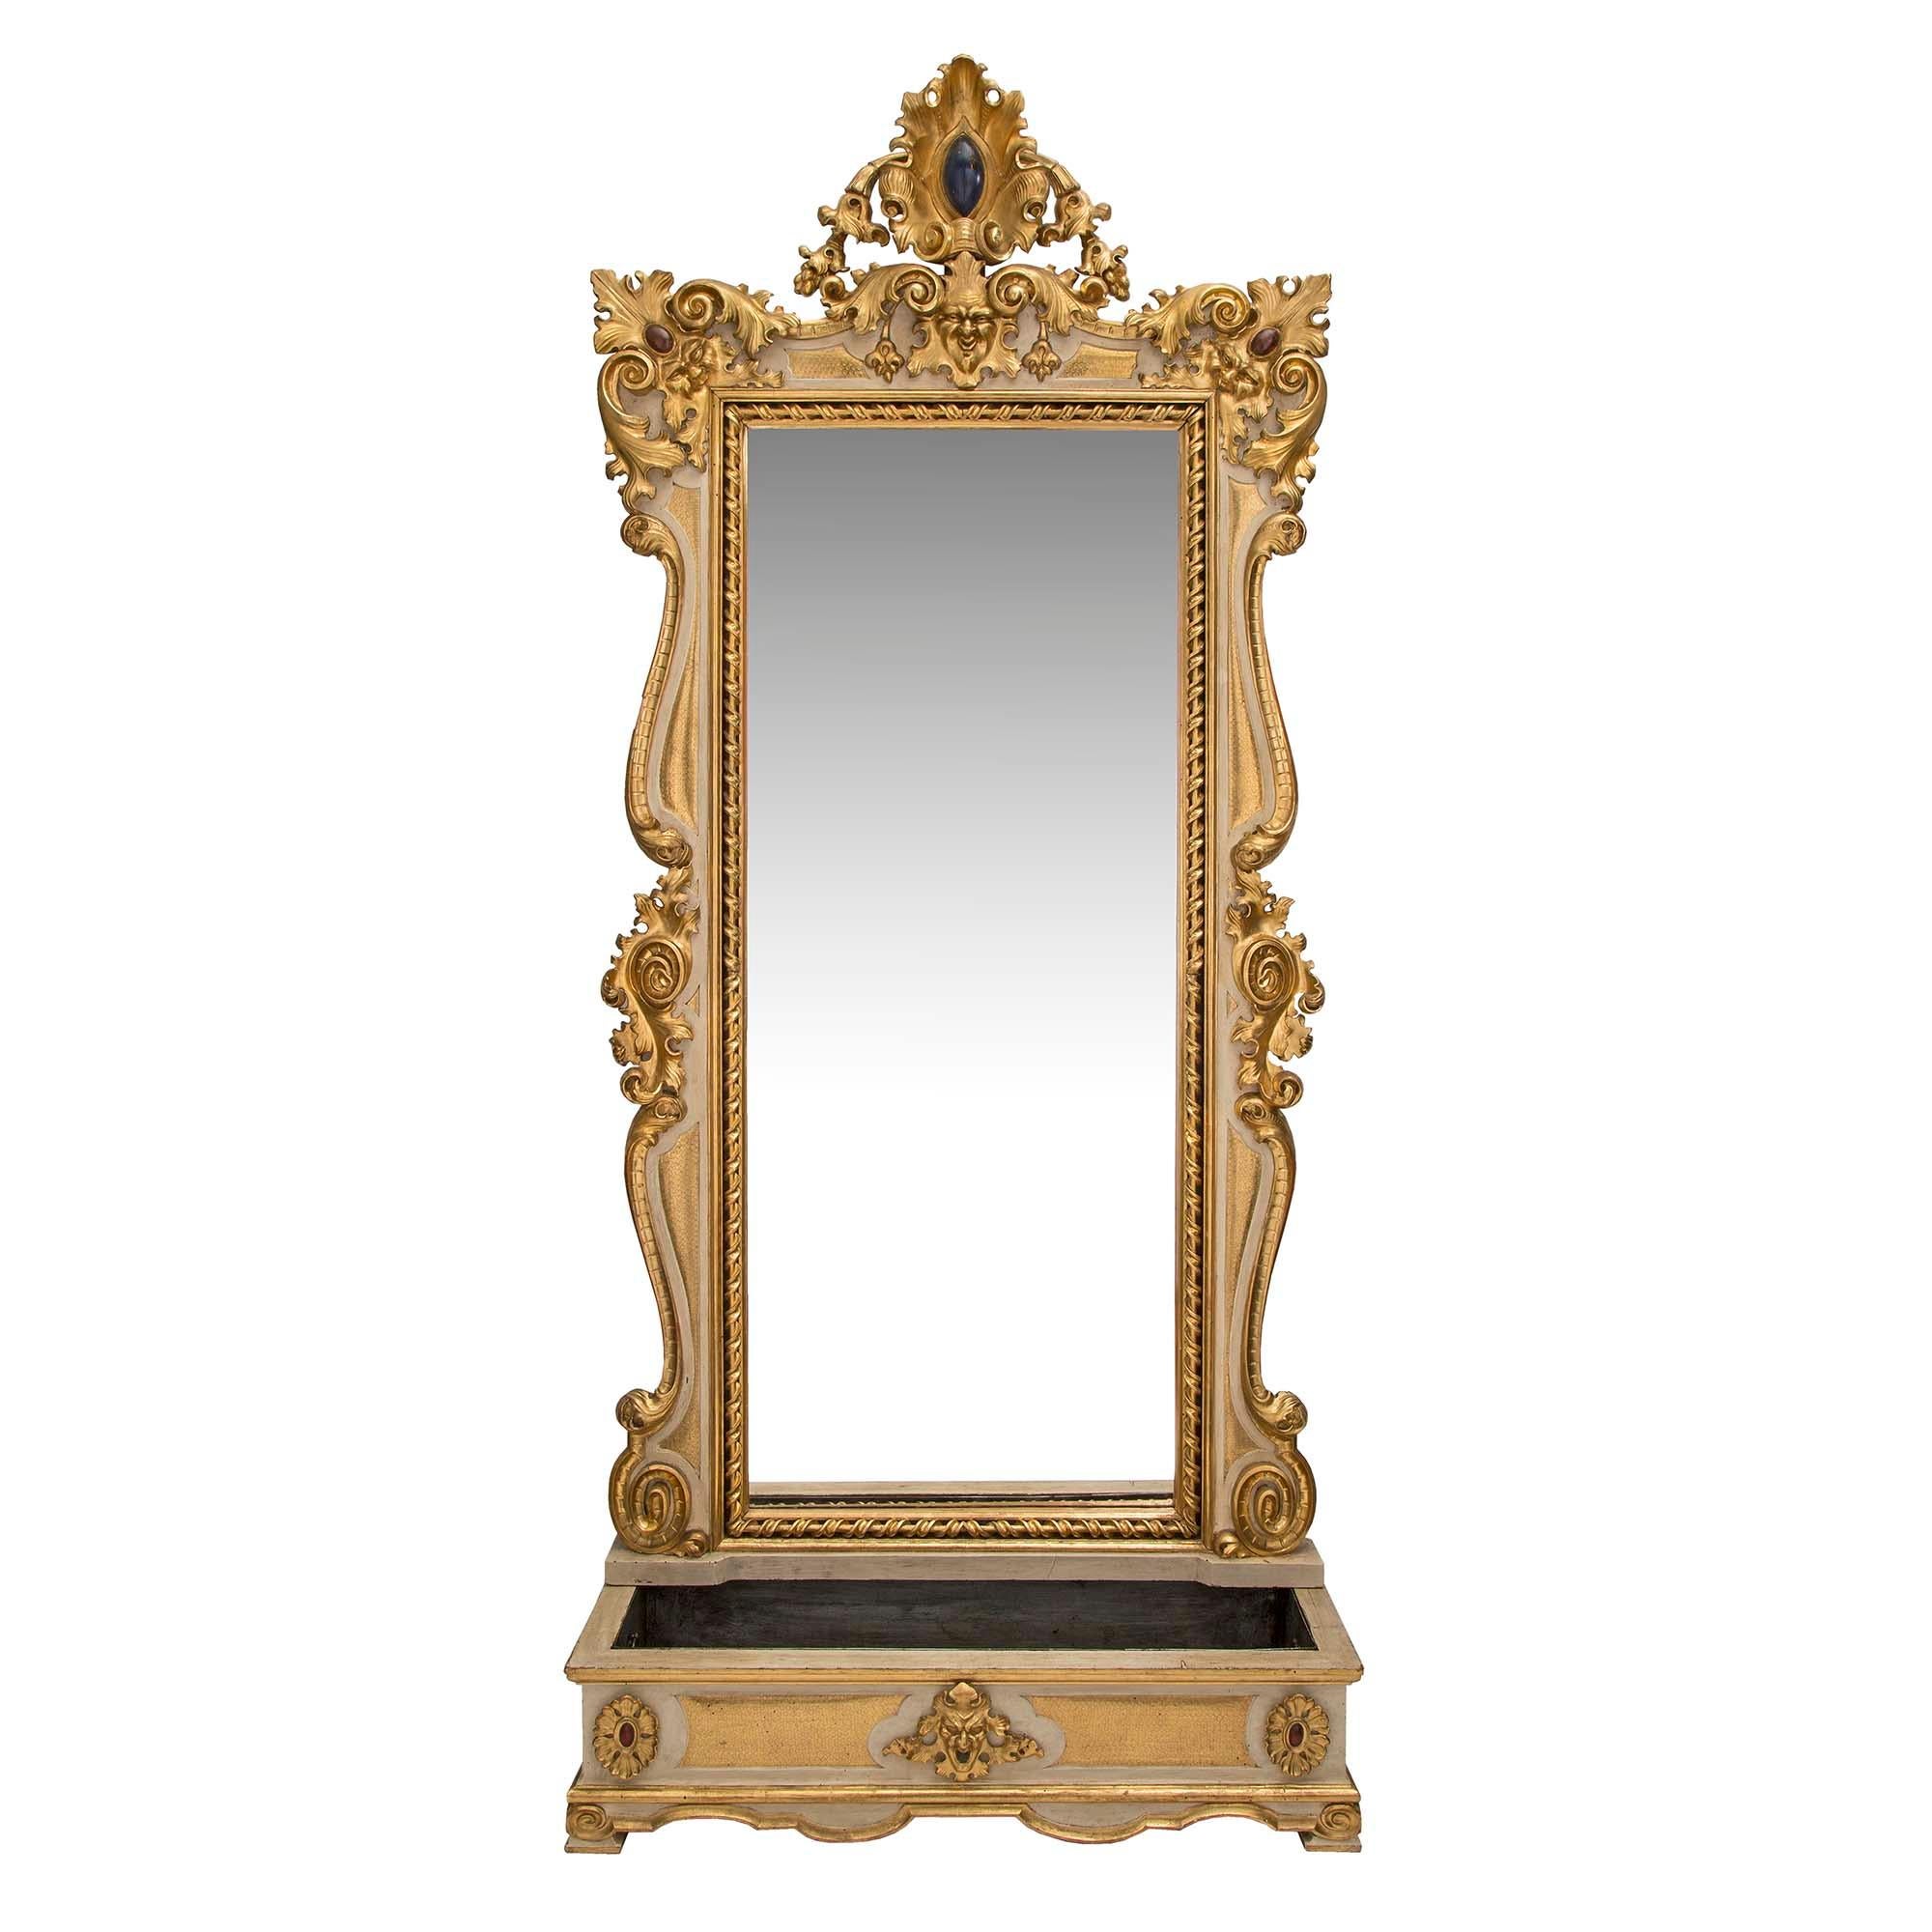 A most decorative and unique Italian 19th century Baroque st. patinated and giltwood mirror with its original matching planter. At the base is the elegant planter with a removable pewter insert. Raised by mottled feet below a scalloped shaped frieze